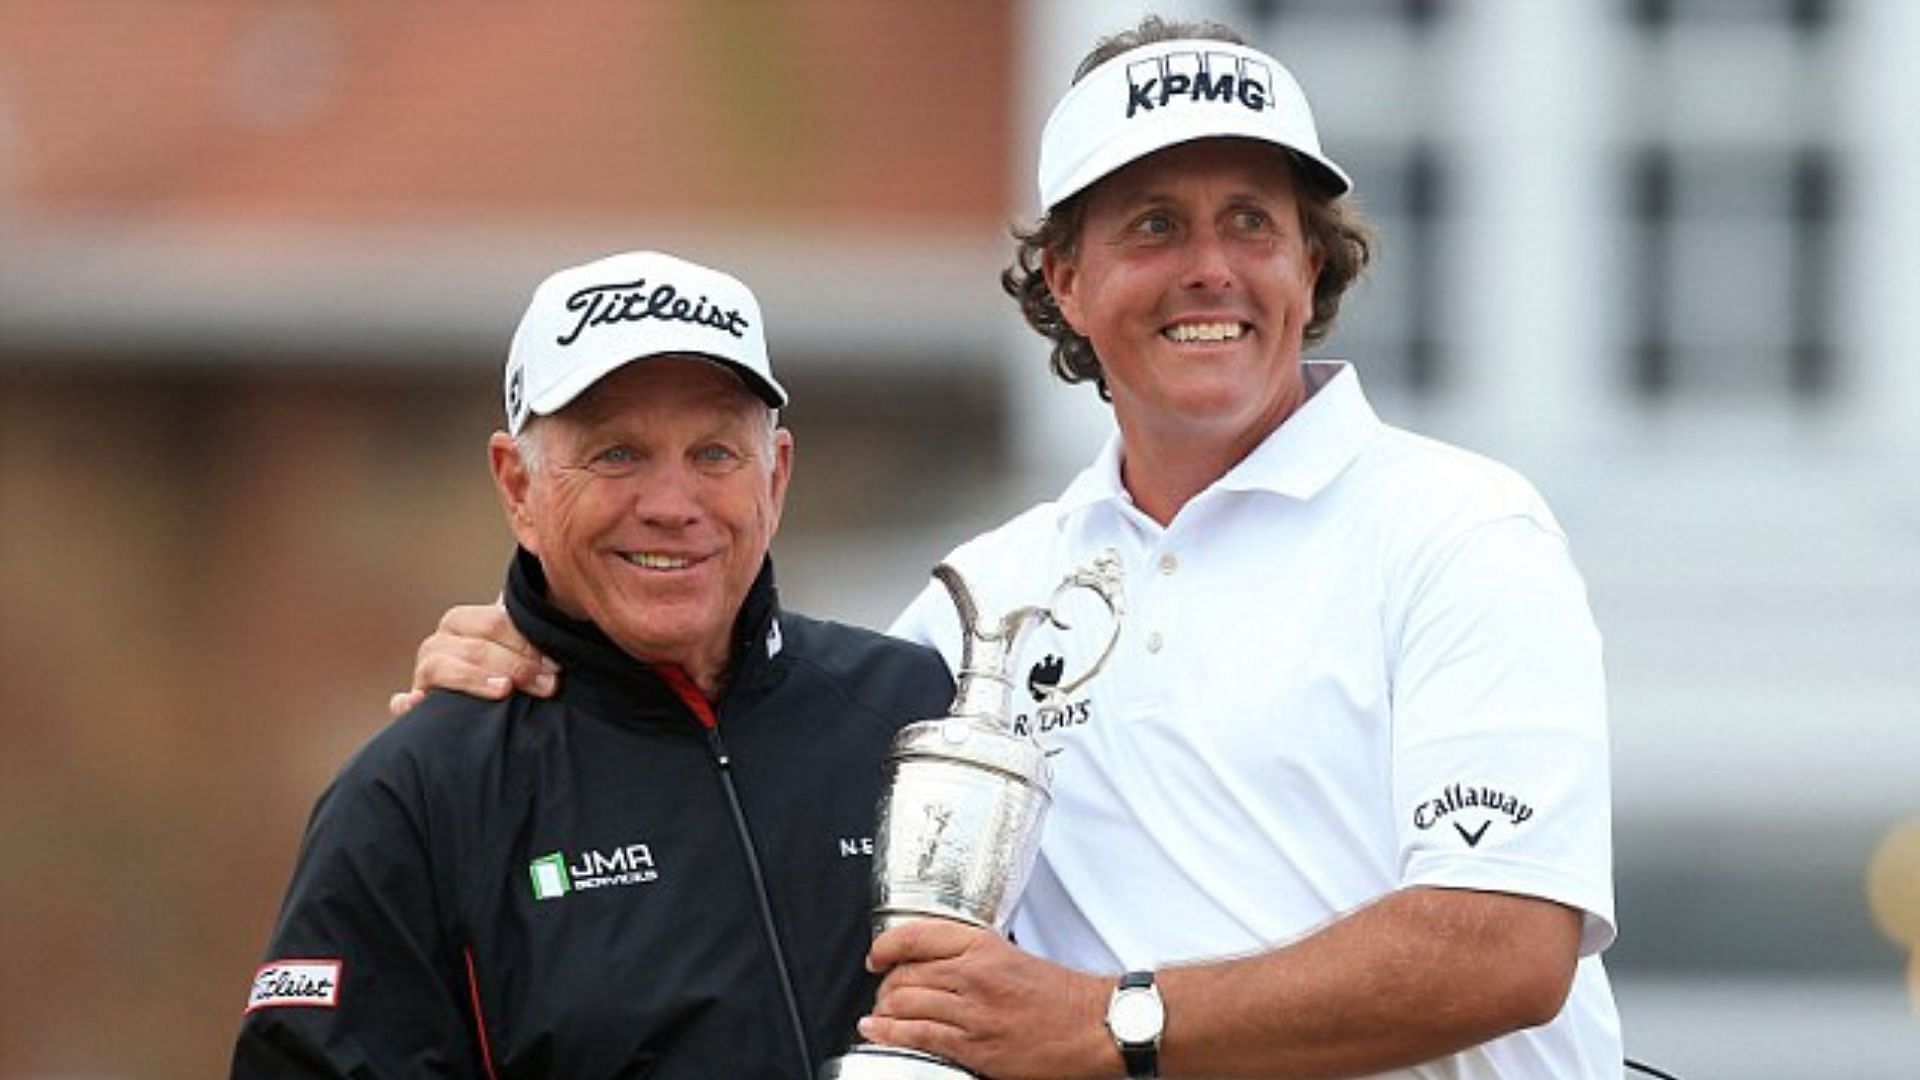 Phil Mickelson and Butch Harmon (Image via PA)